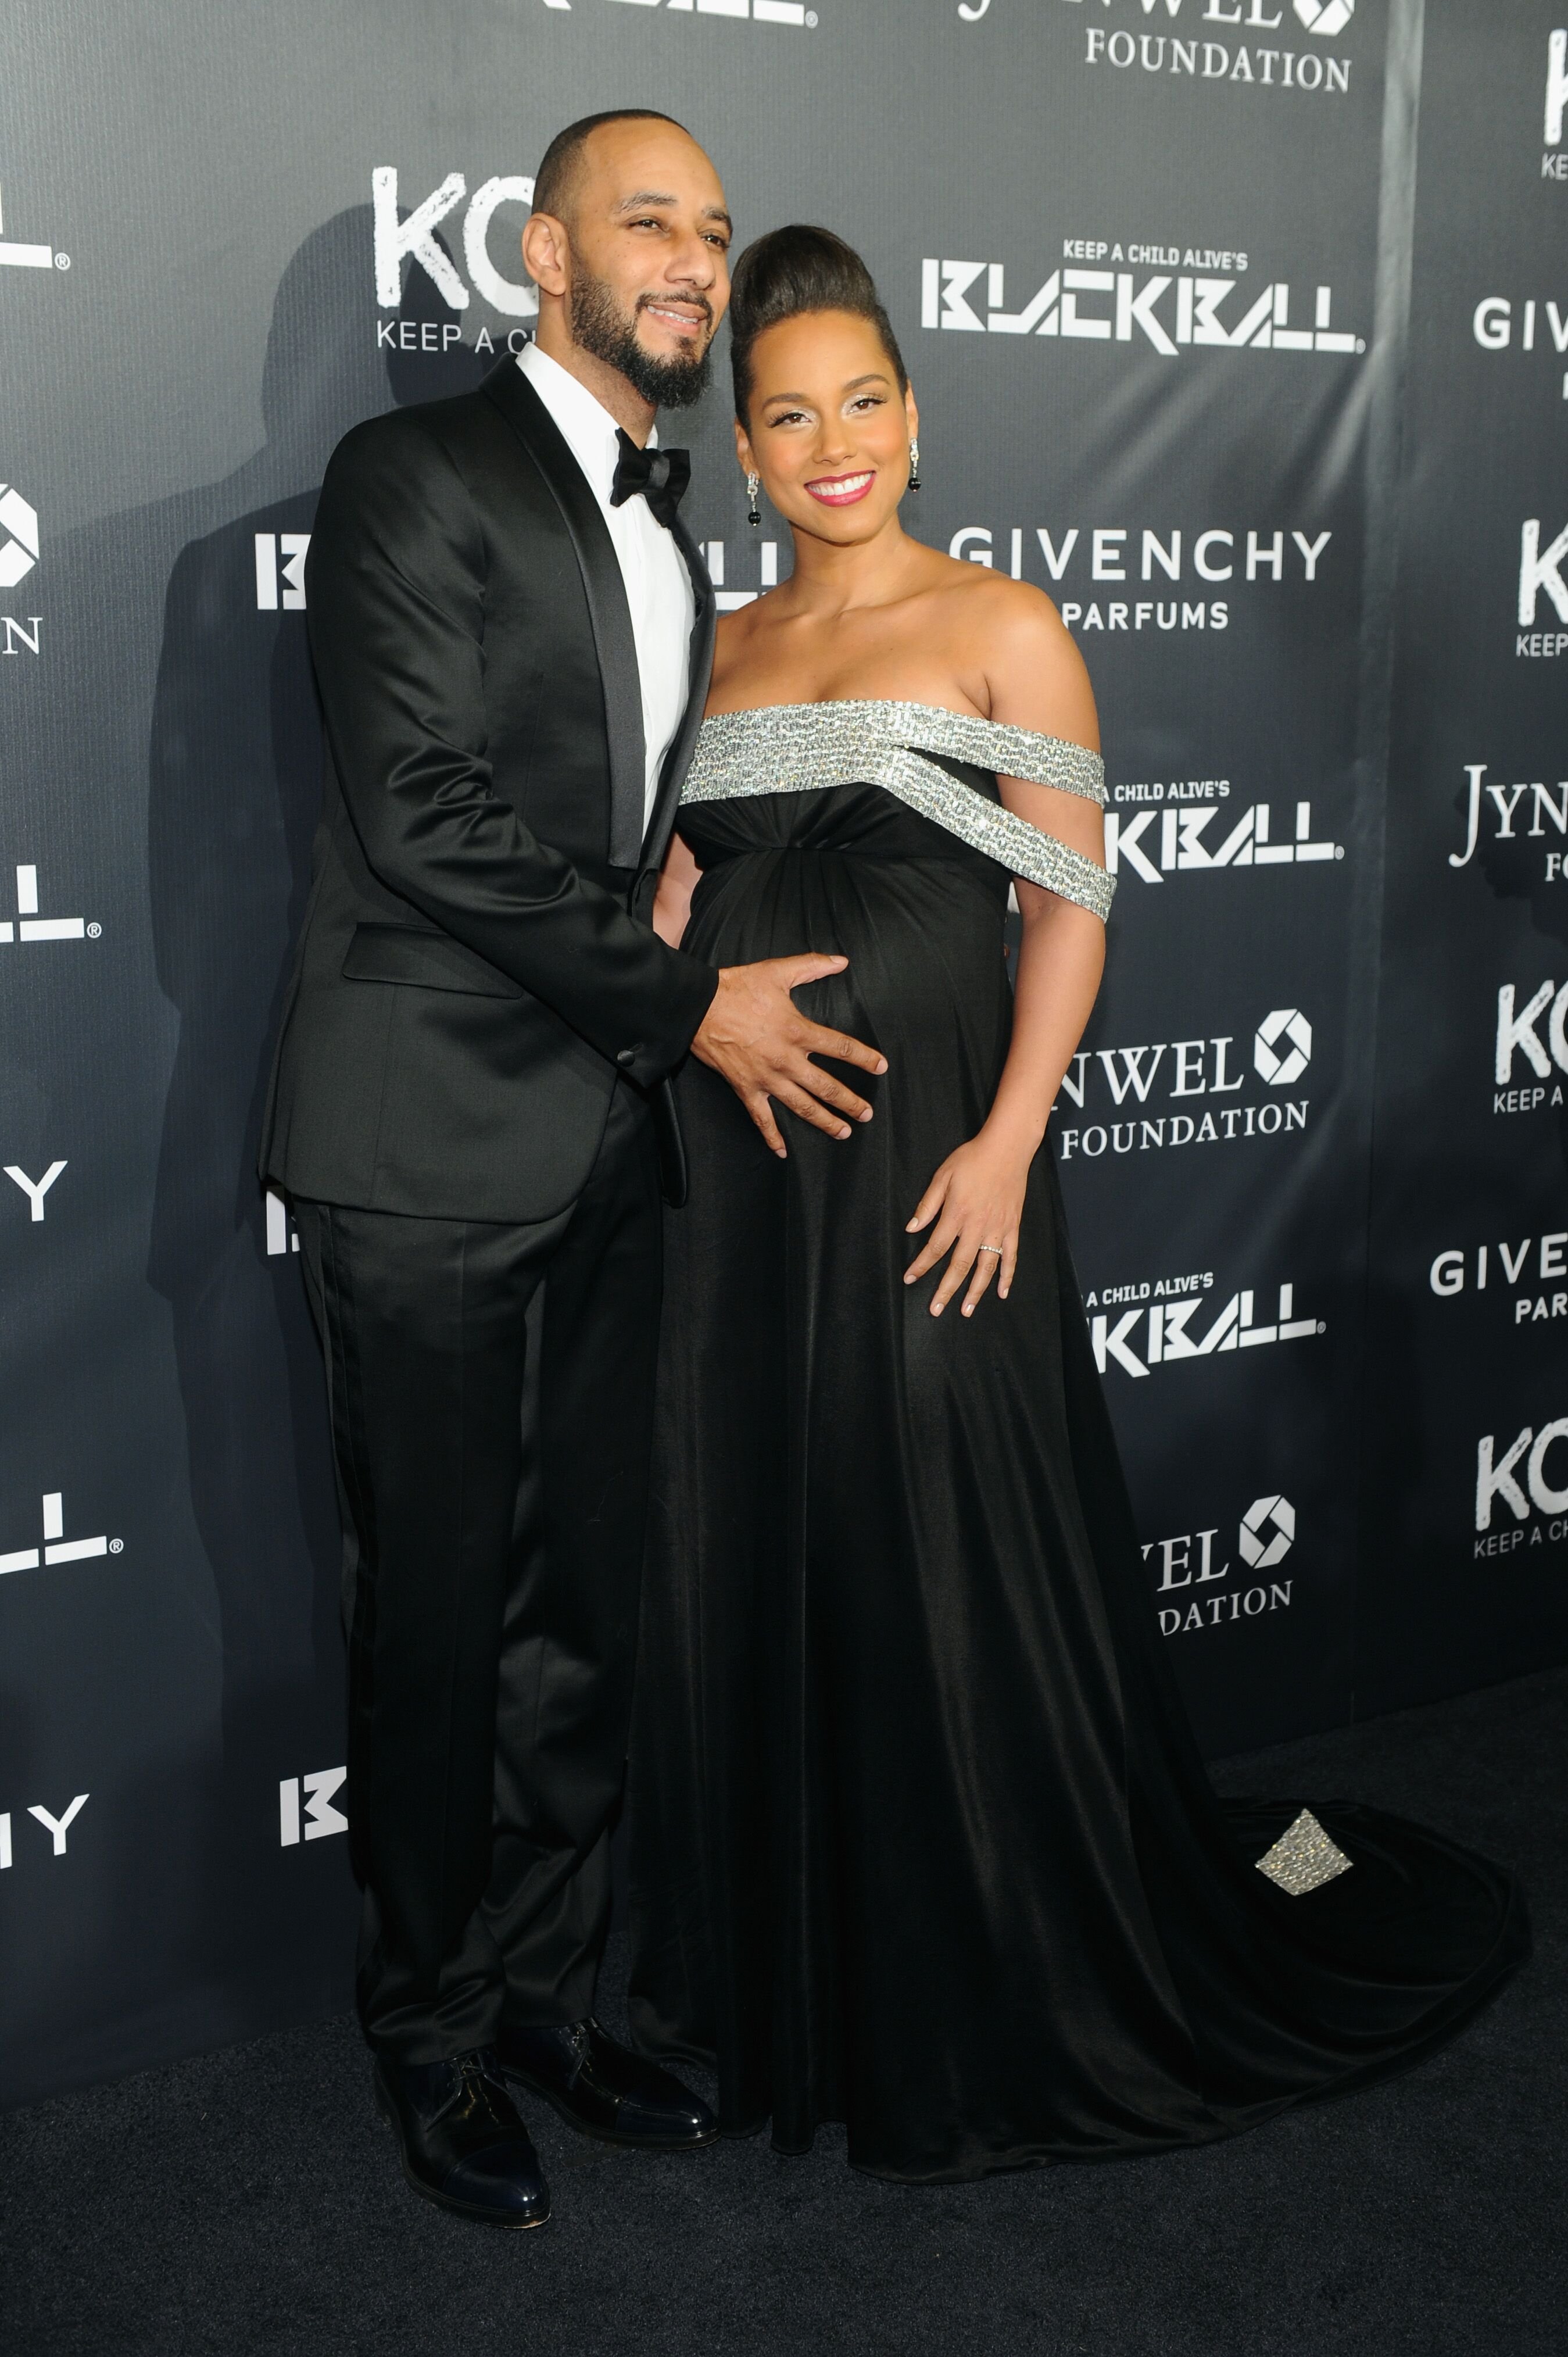 wizz Beats and Alicia Keys at the 9th annual Keep A Child Alive Black Ball in 2014 | Source: Getty Images